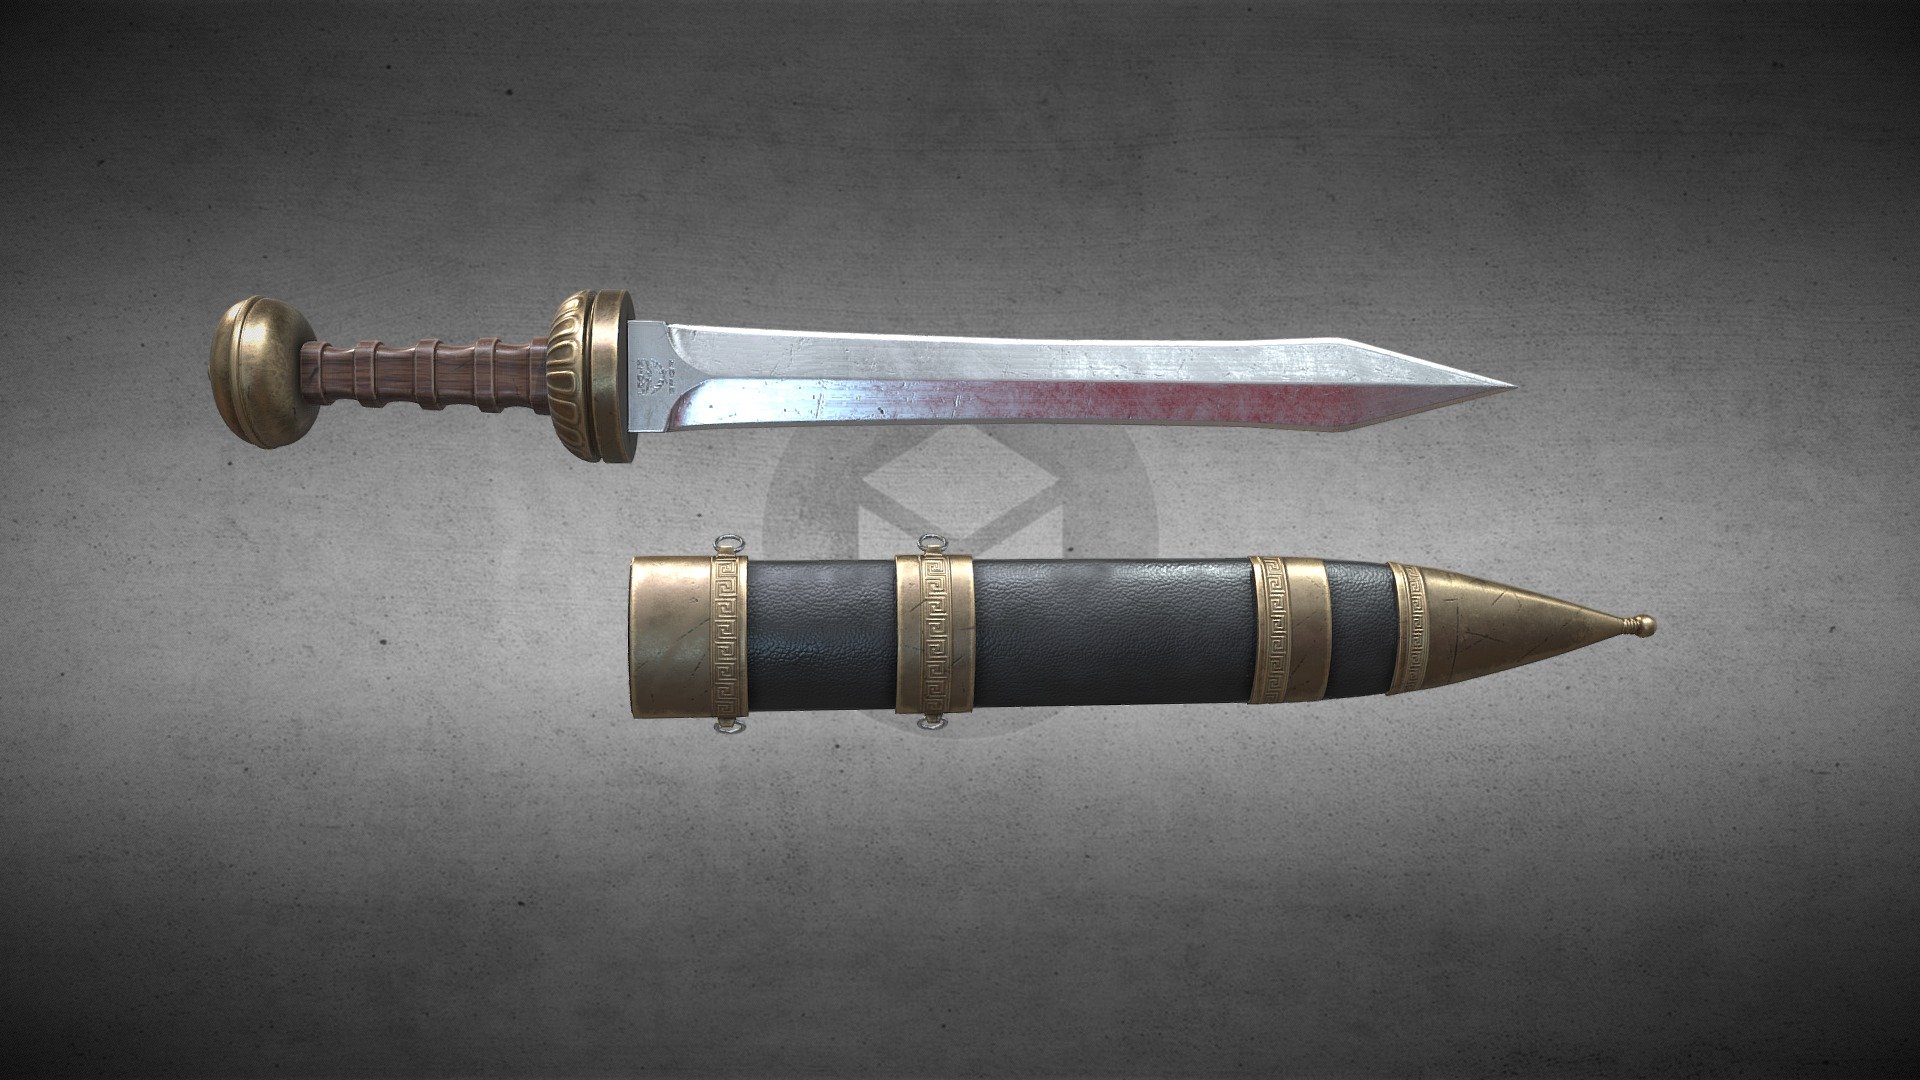 Low poly model of roman sword and scabbard, scaled to real life dimensions.

All parts and textures named.

Made in blender and substance painter.

verts - 6113

faces - 12006 - Roman sword Gladius - 3D model by MaximCg 3d model